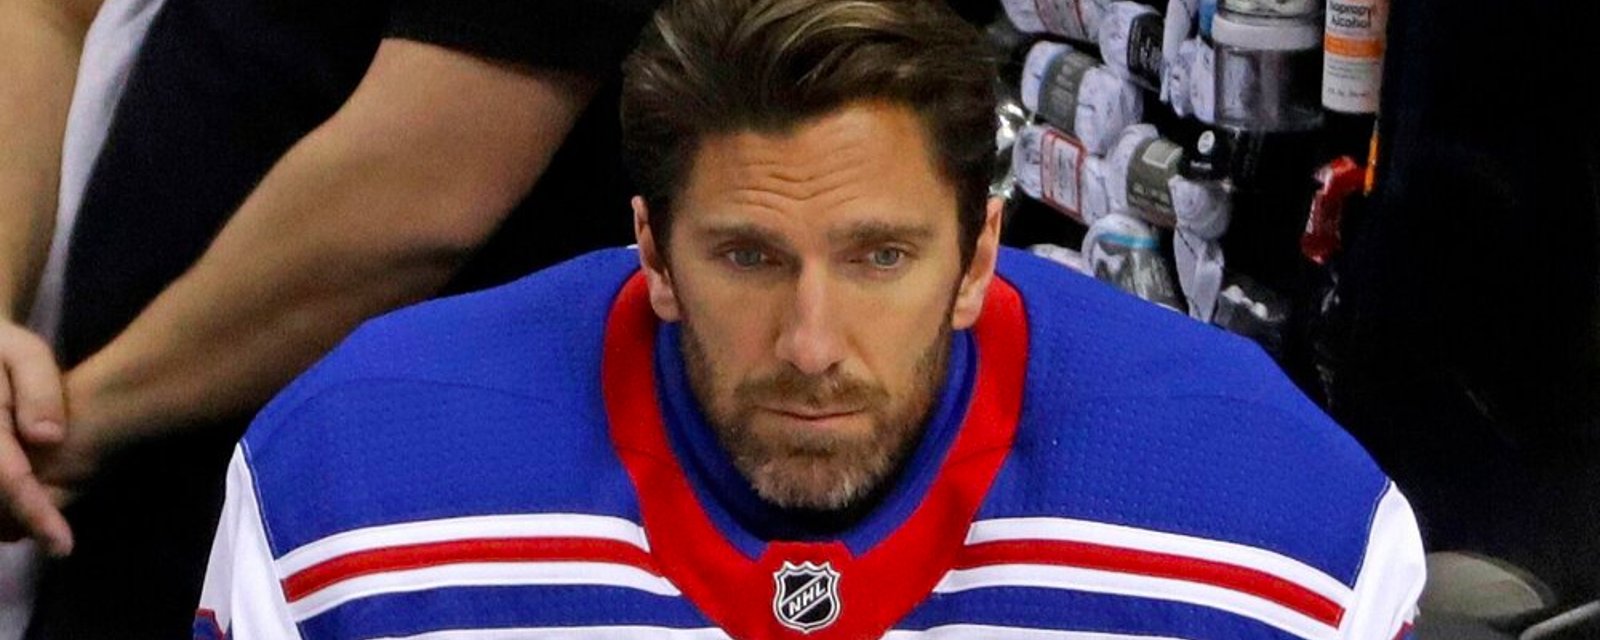 Rumor: Lundqvist is done with the Rangers